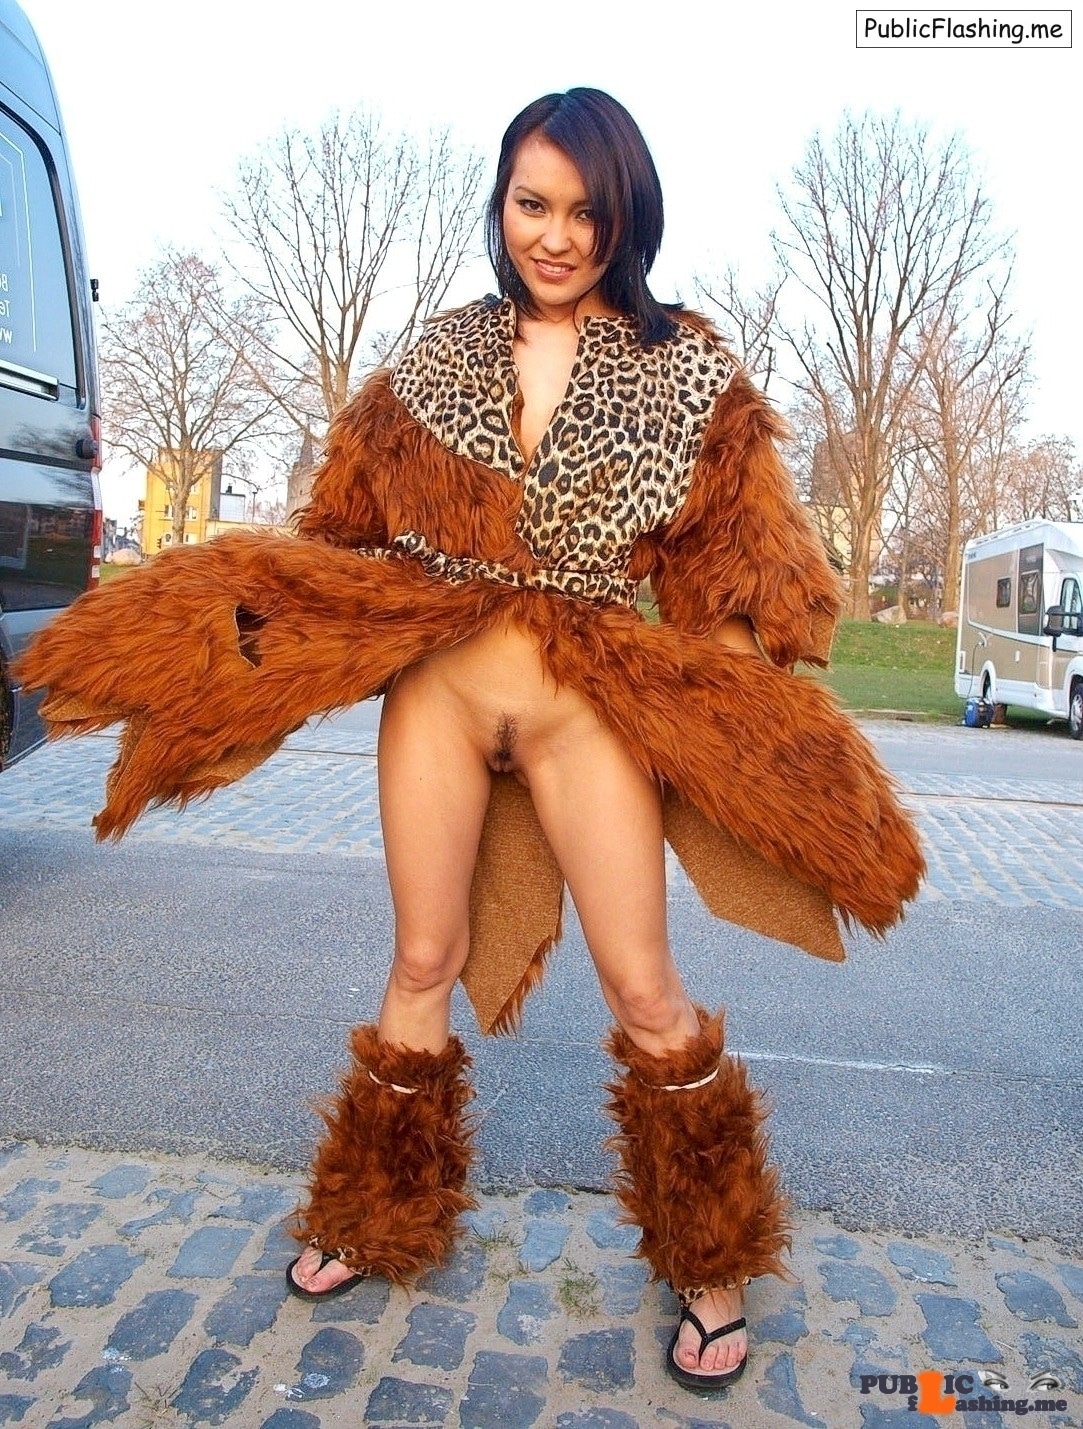 no underwer asian - Asian model in brown coat pussy public nudity Beautiful Asian model is posing to the camera dressed just in some brown fur coat and fluffy leg warmers, wearing nothing under and flashing her nice trimmed pussy on a public car... - Asian